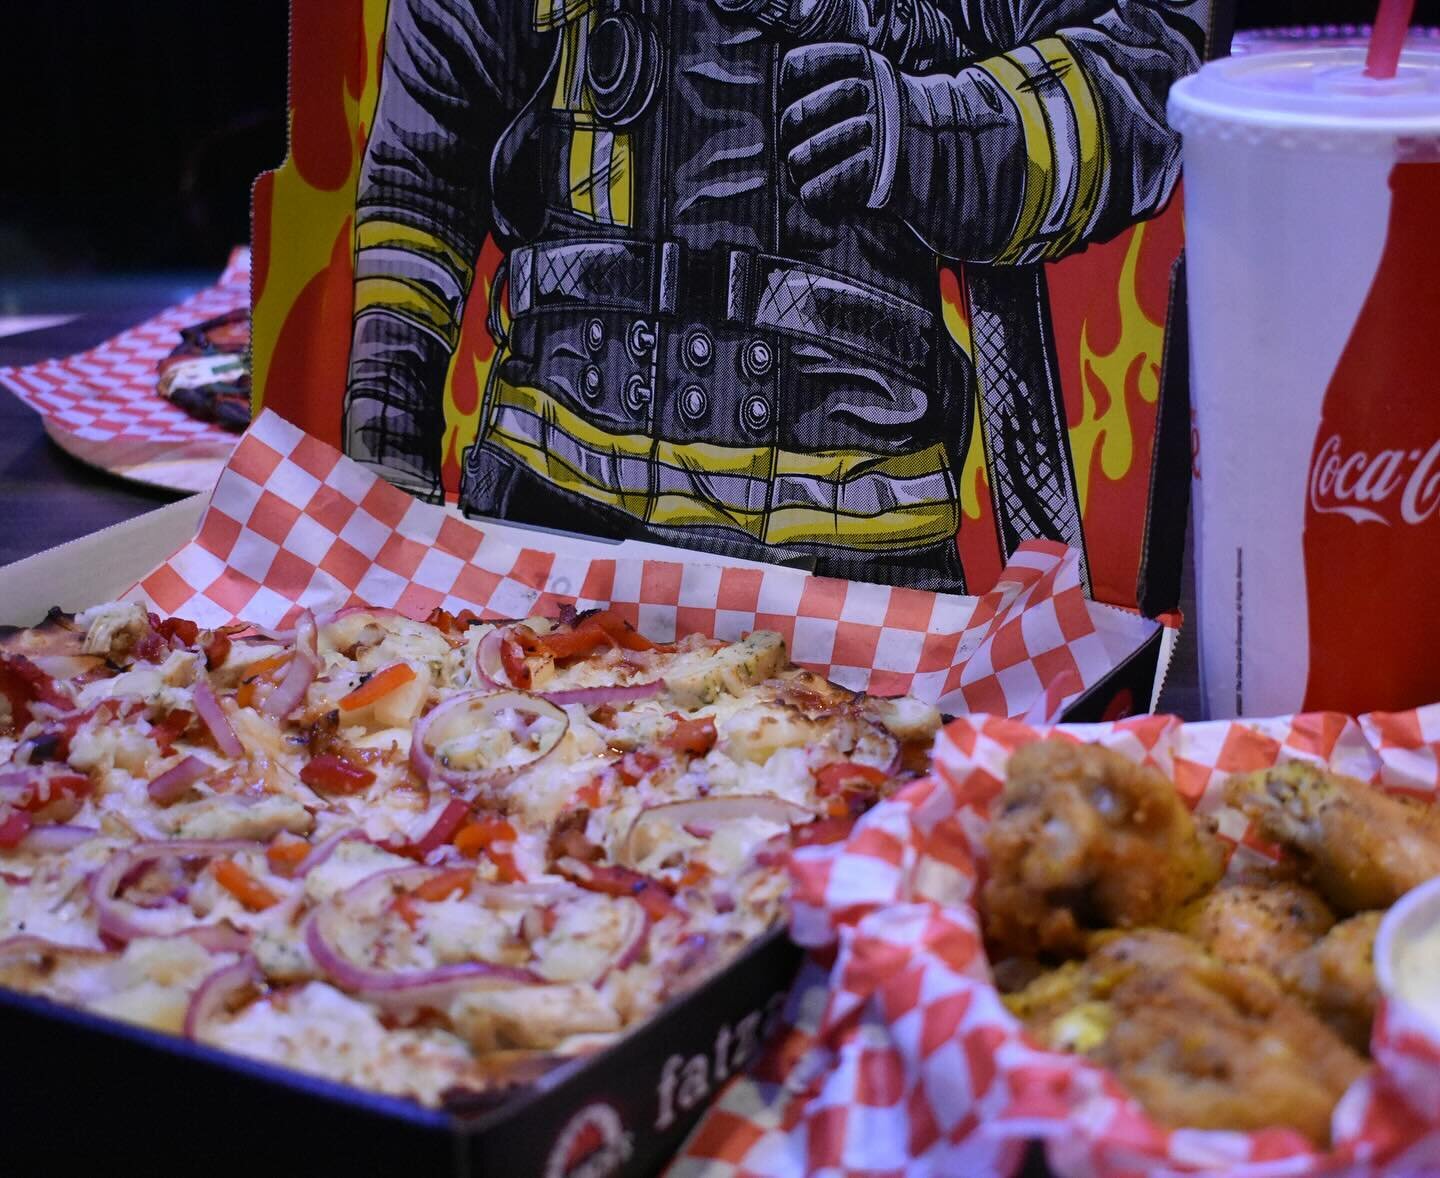 Did you know our Puyallup pizza boxes have a firefighter on them as an homage to the restaurant that was here before us, Sparks Firehouse Deli? Were you a patron of the old Sparks? 🔥 👨&zwj;🚒 we hope to bring the same #hometown feeling they did! Wh